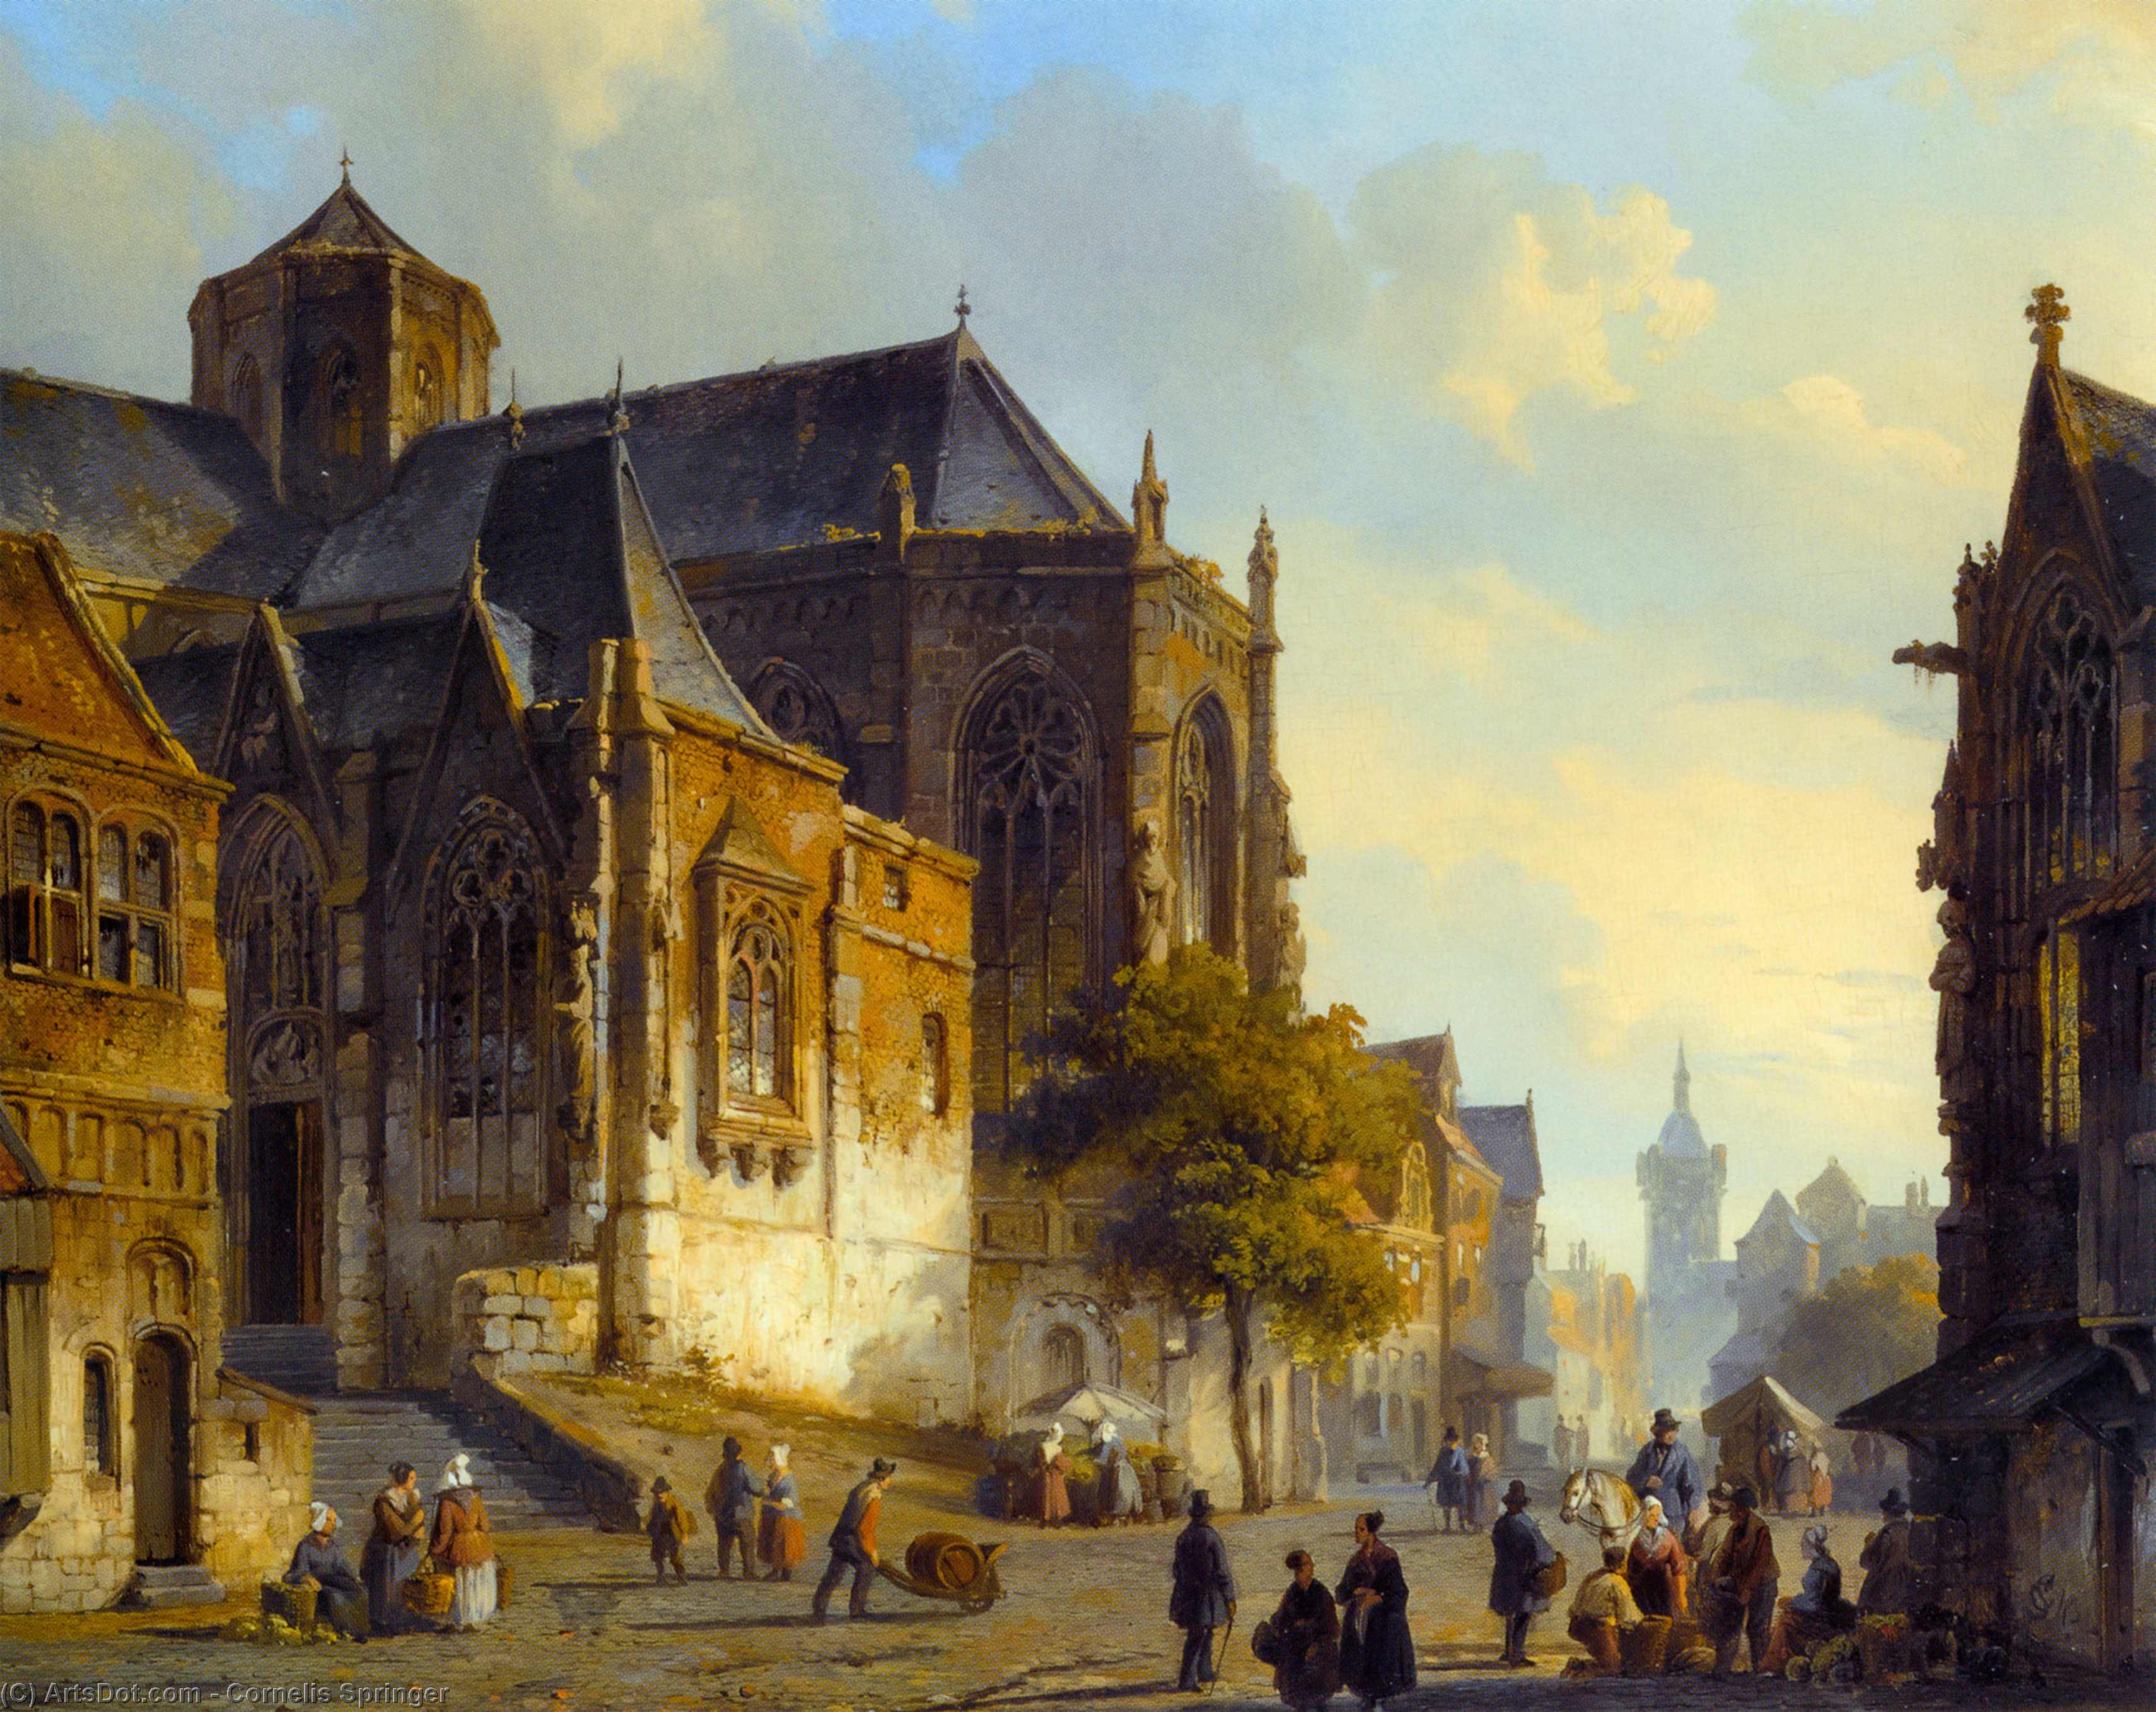 Order Oil Painting Replica Figures on a Market Square in a Dutch Town, 1843 by Cornelis Springer (1817-1891) | ArtsDot.com